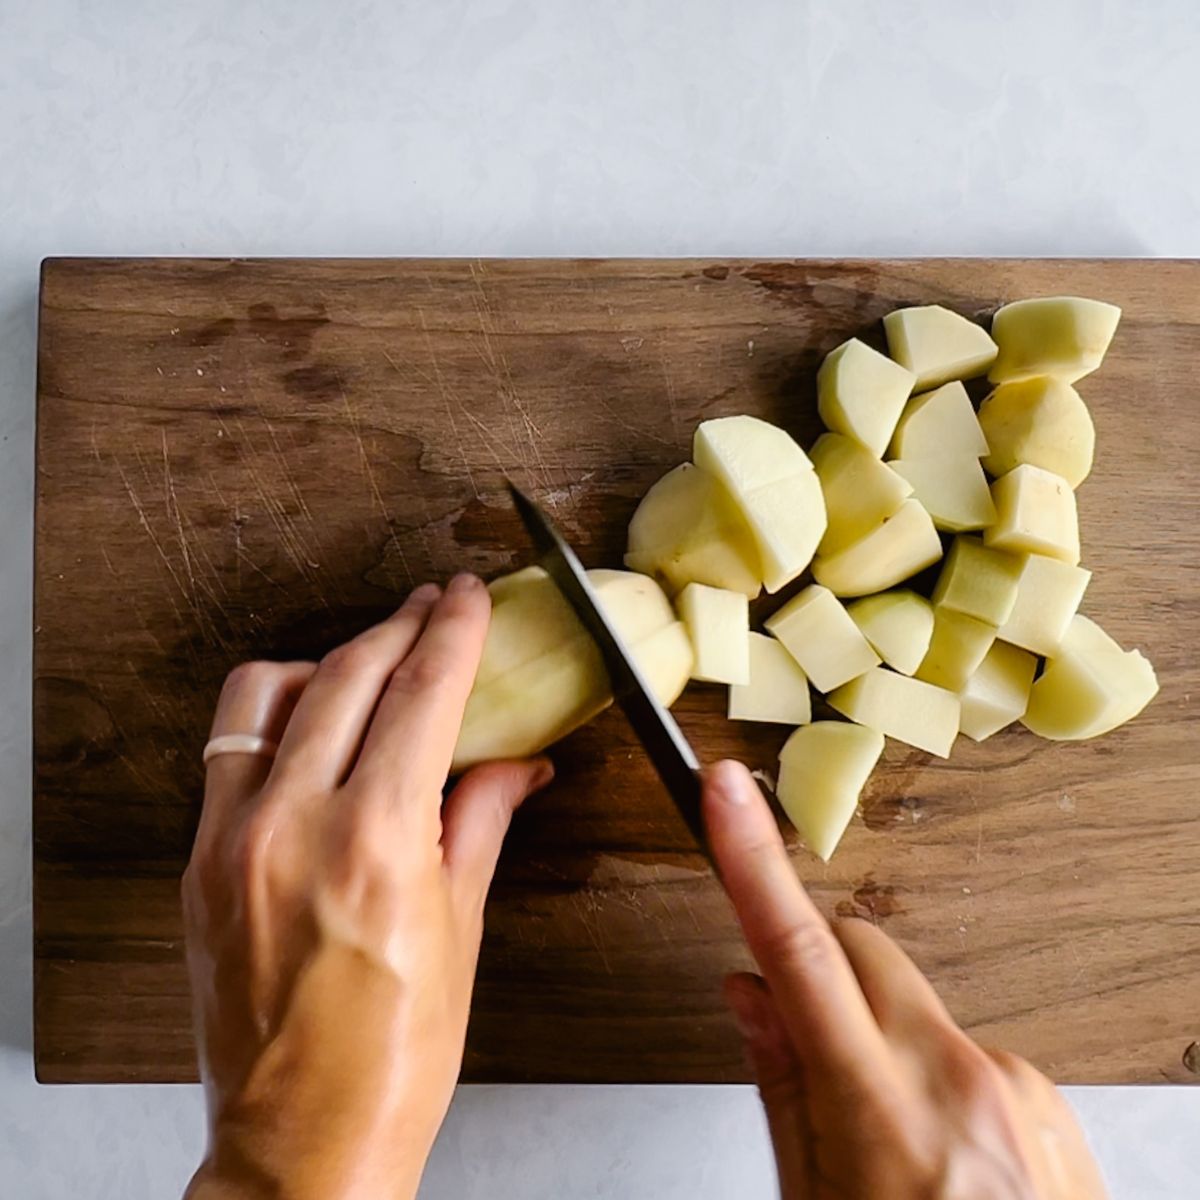 Dicing potatoes into inch long pieces on a cutting board.